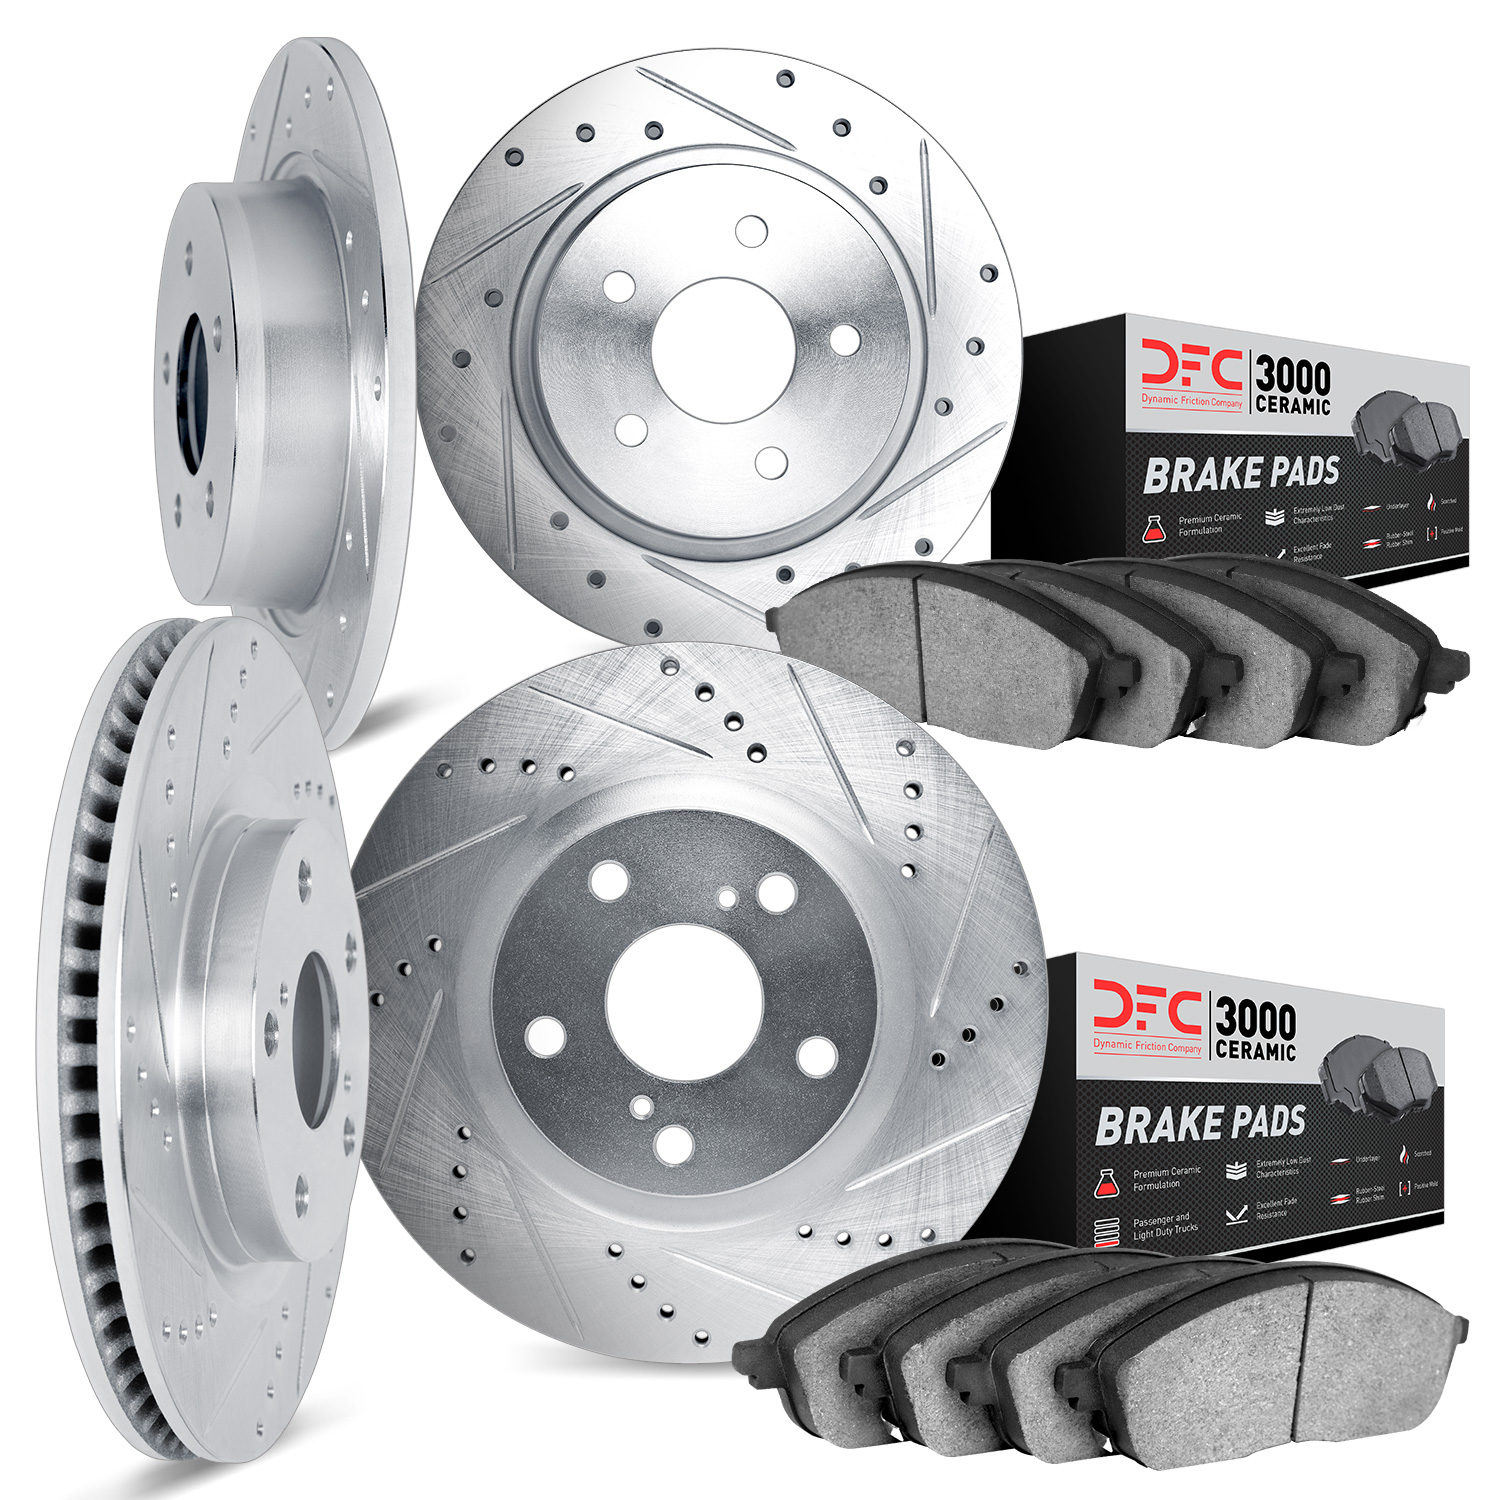 7304-54118 Drilled/Slotted Brake Rotor with 3000-Series Ceramic Brake Pads Kit [Silver], 2015-2020 Ford/Lincoln/Mercury/Mazda, P